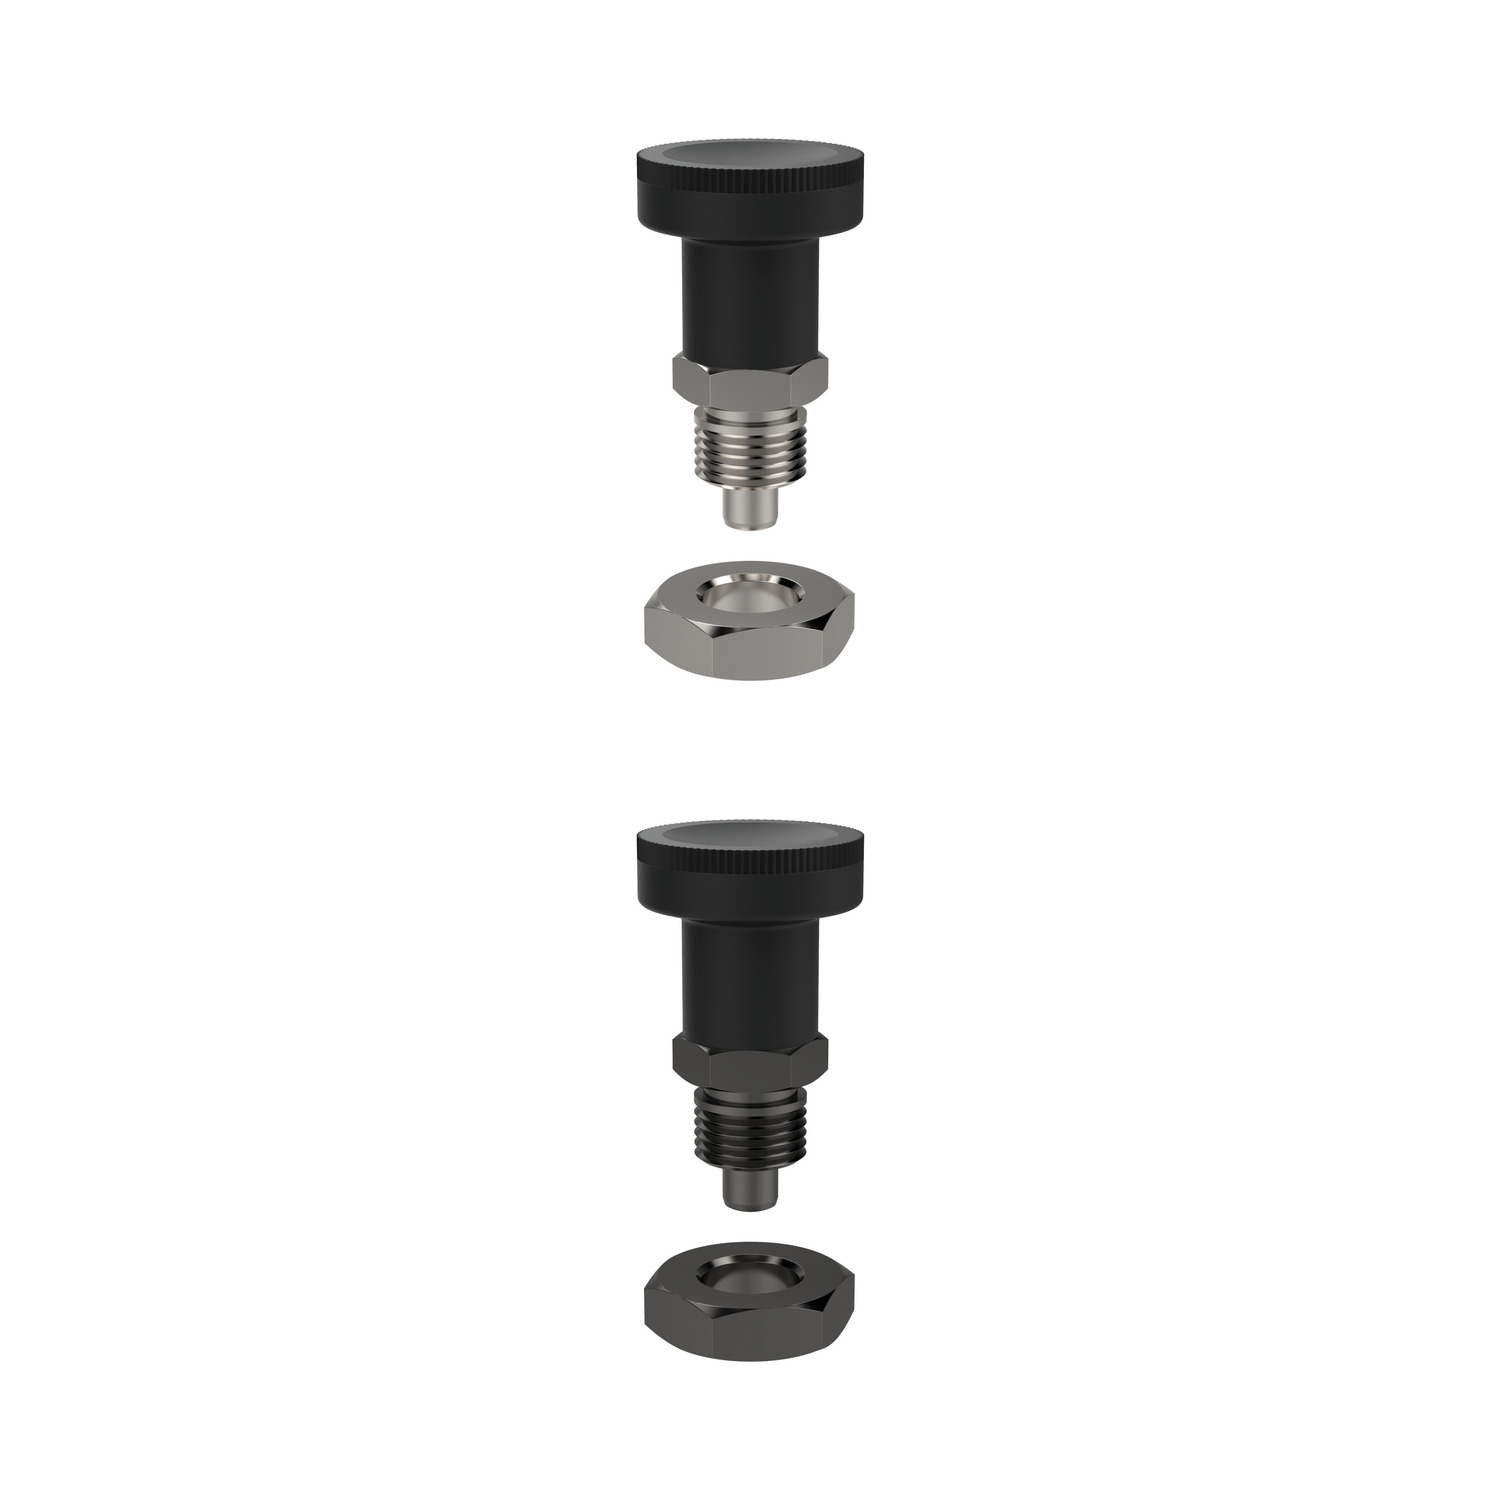 Index Plungers - Pull Grip Short bodied index plungers for compact applications. Available in locking & non-locking models. Hexagon collar improves leverage for secure installation.